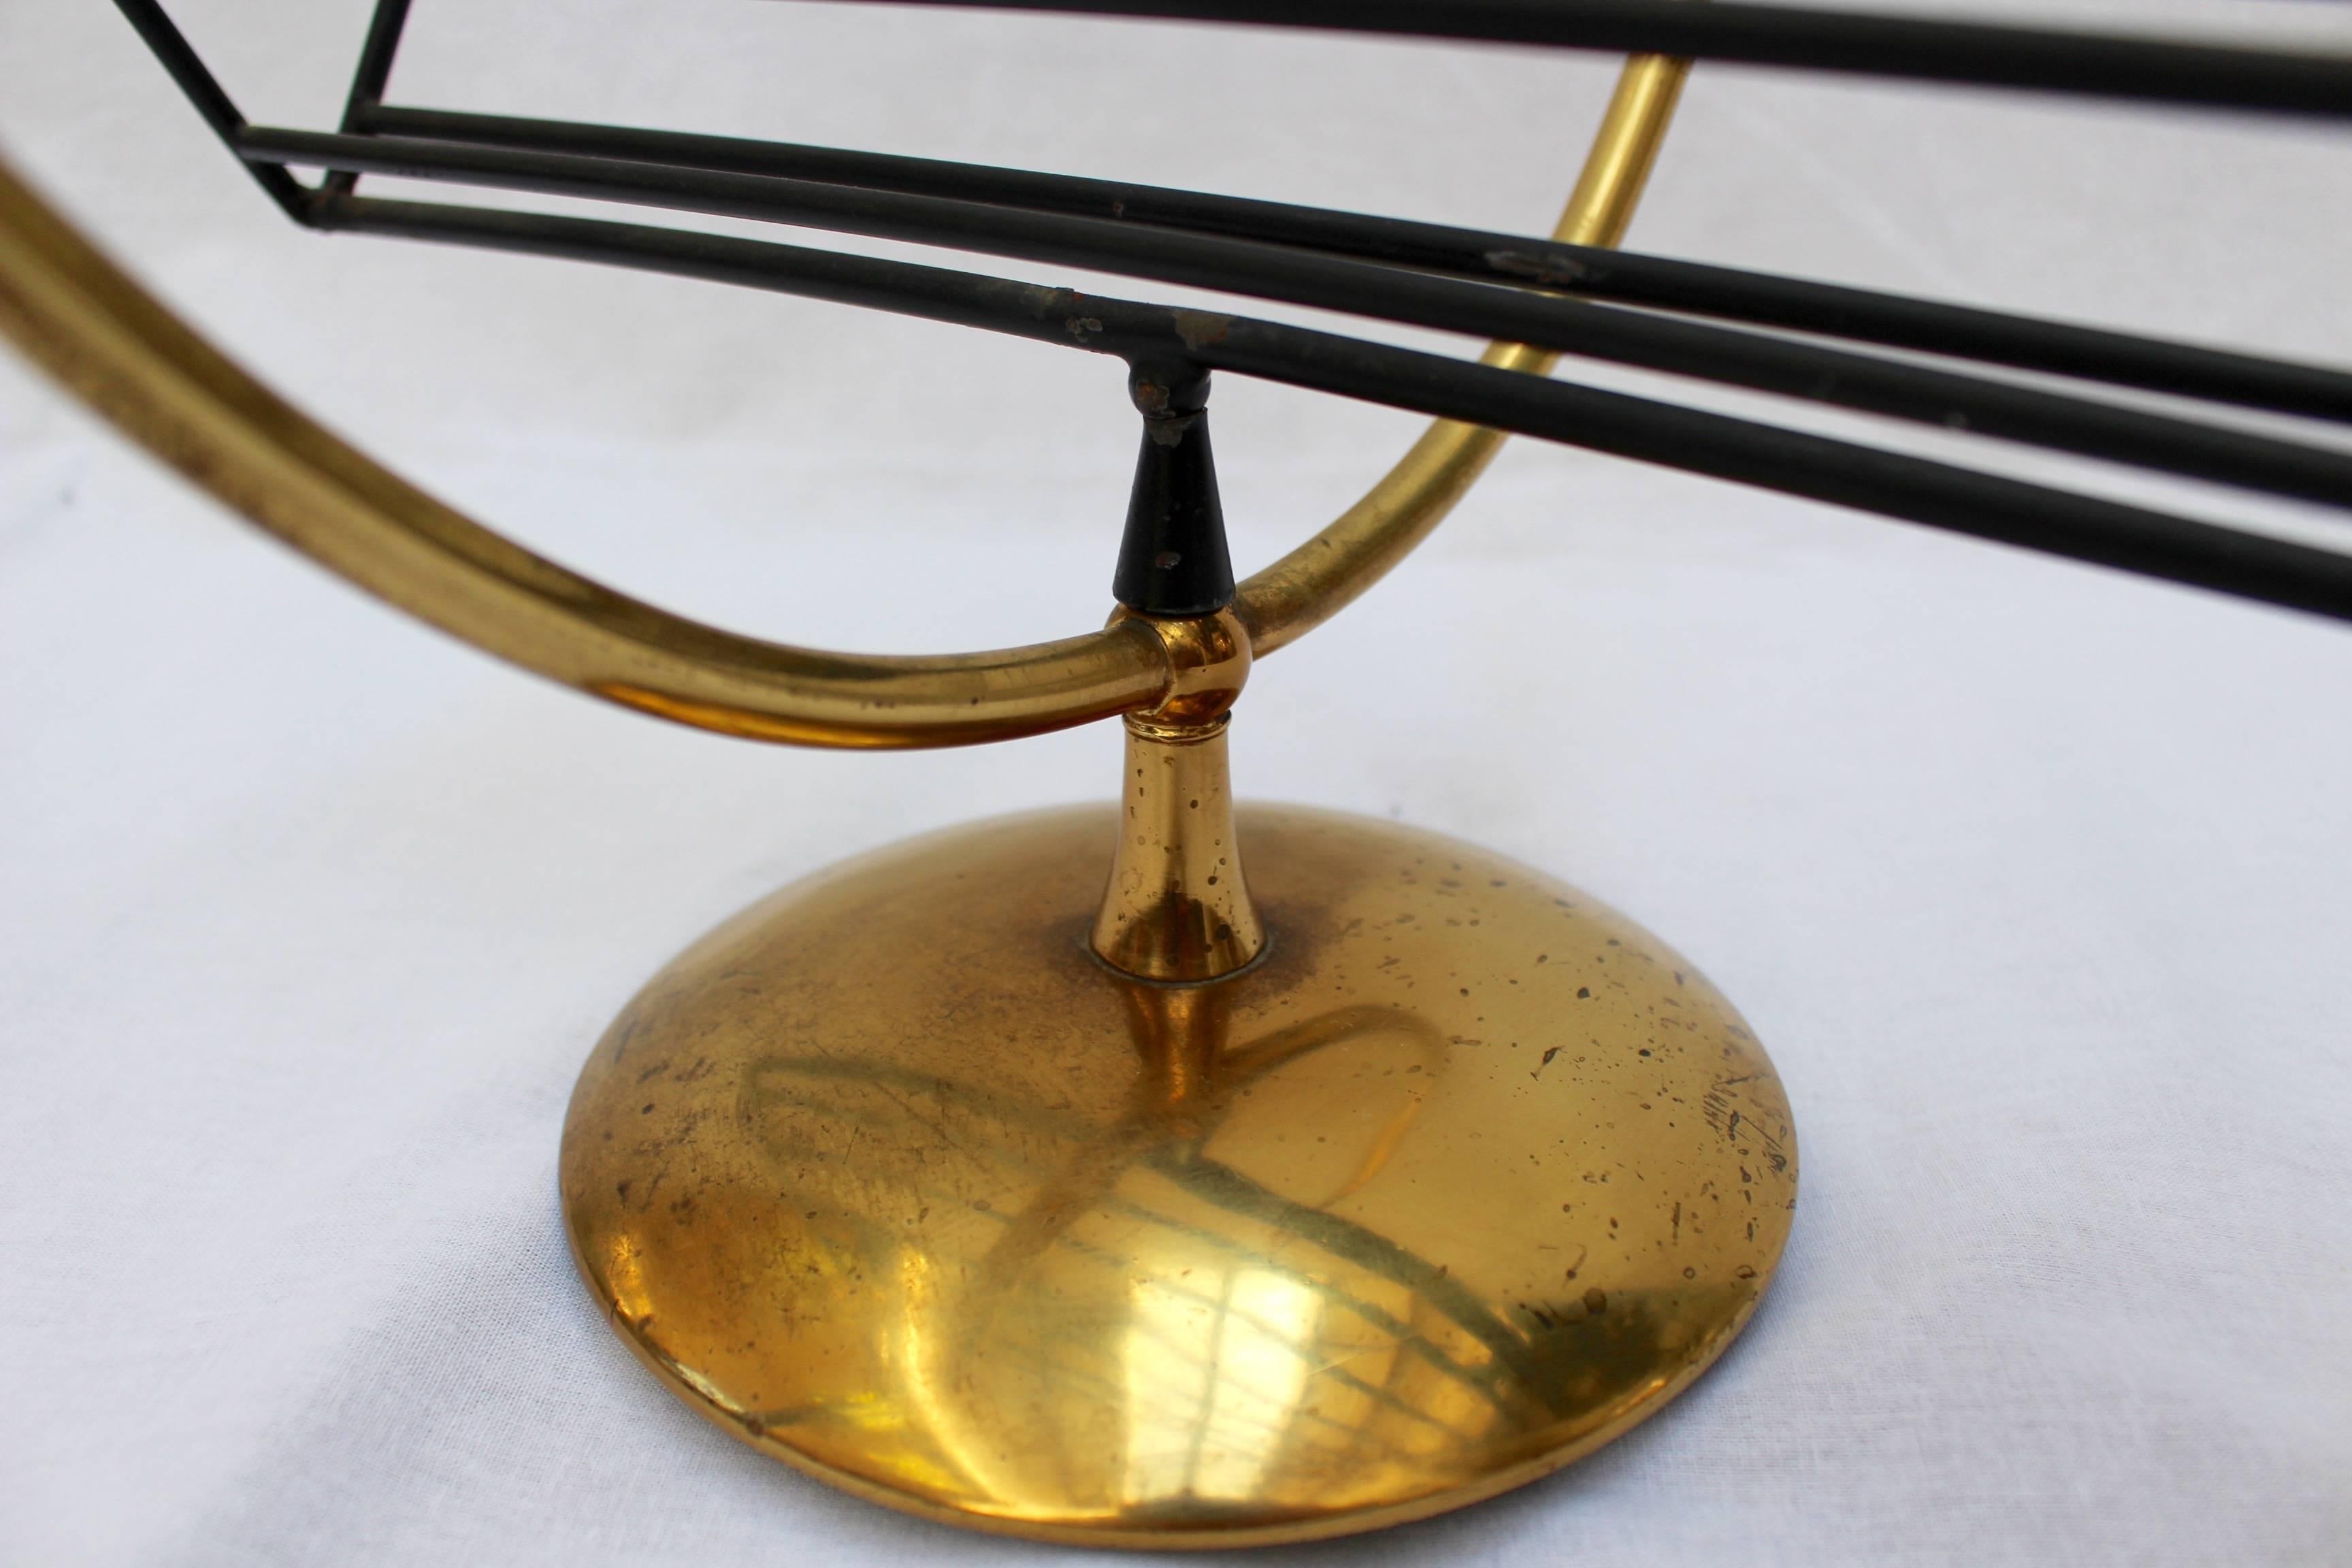 Music Note-Shaped Italian Brass Magazine Stand (c. 1950s) For Sale 4